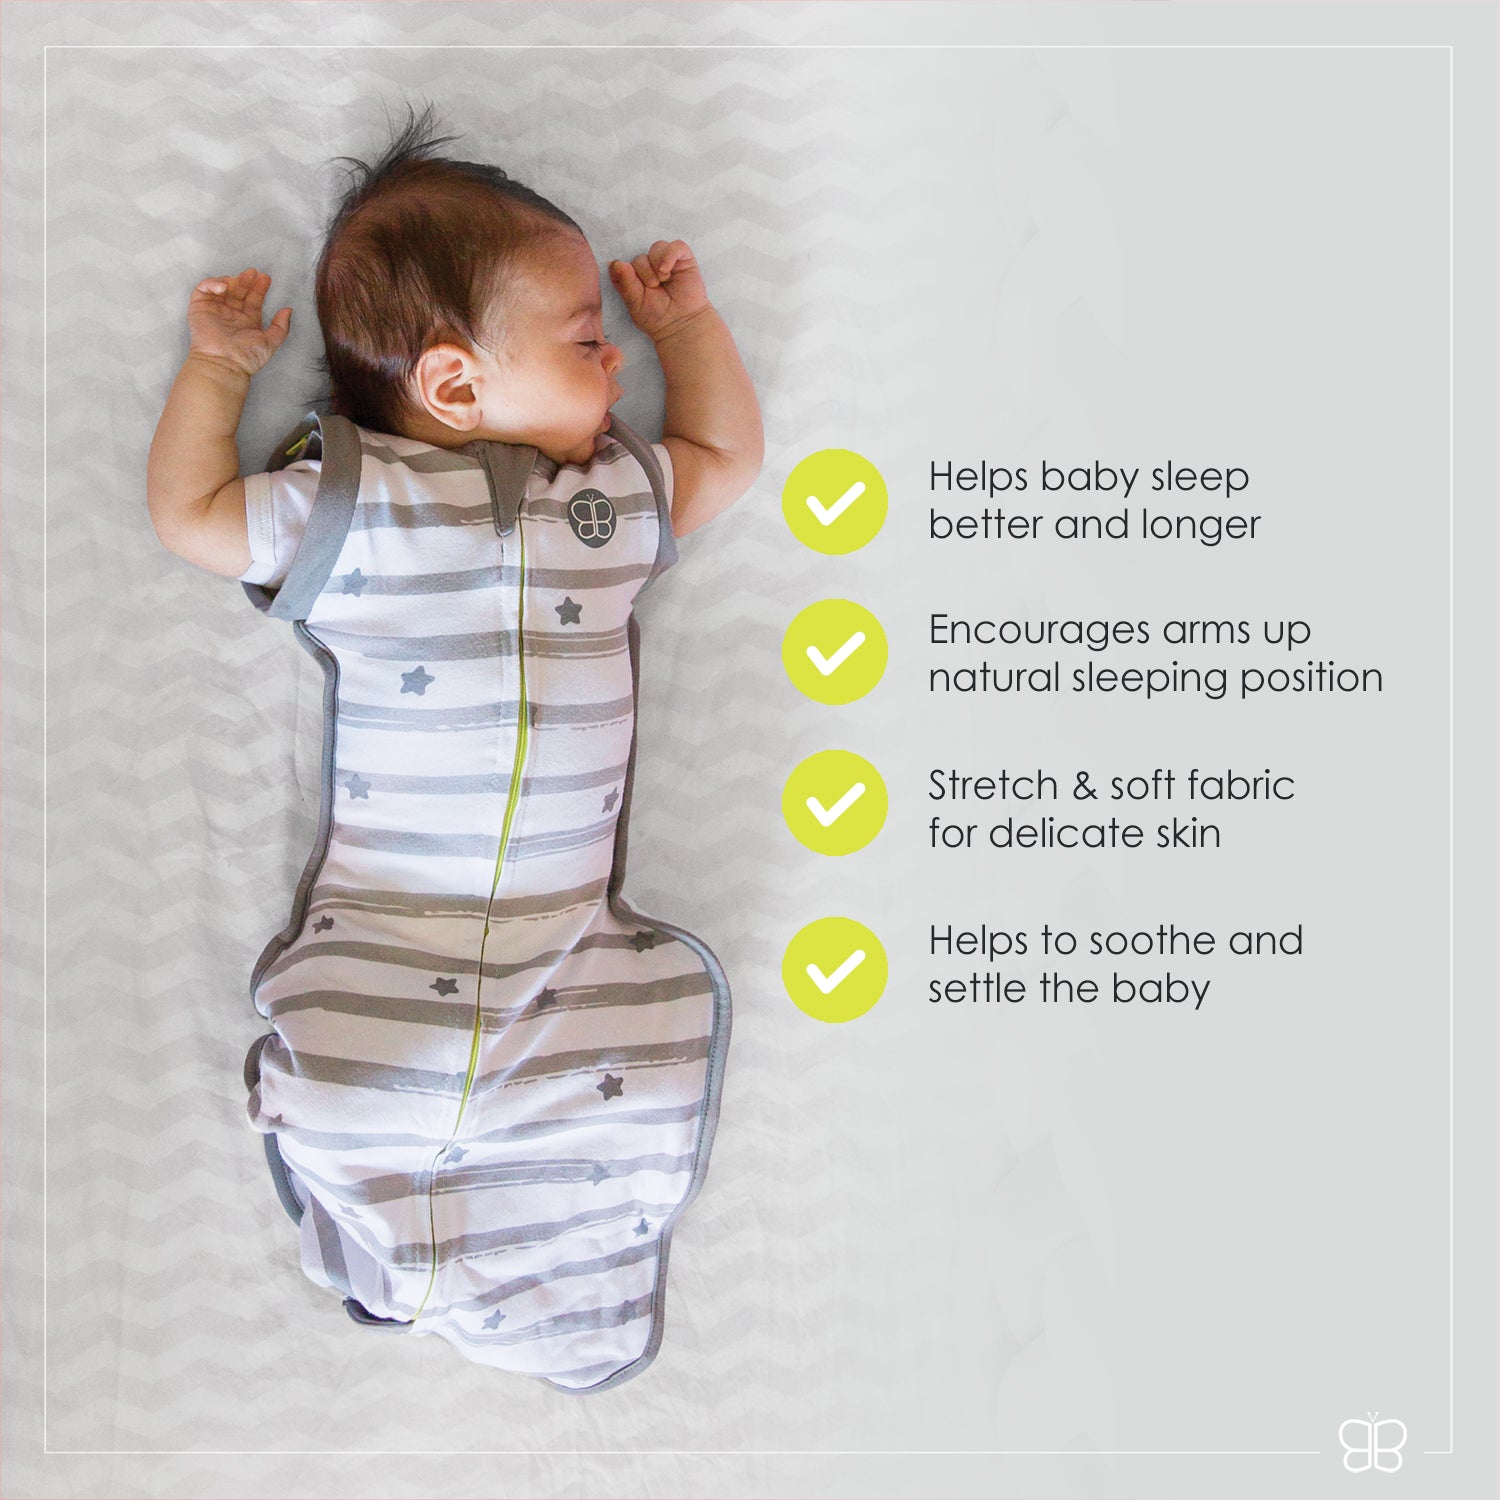 Sleep - 3-In-1 Evolutive Swaddle with Removable Sleeves (Large)